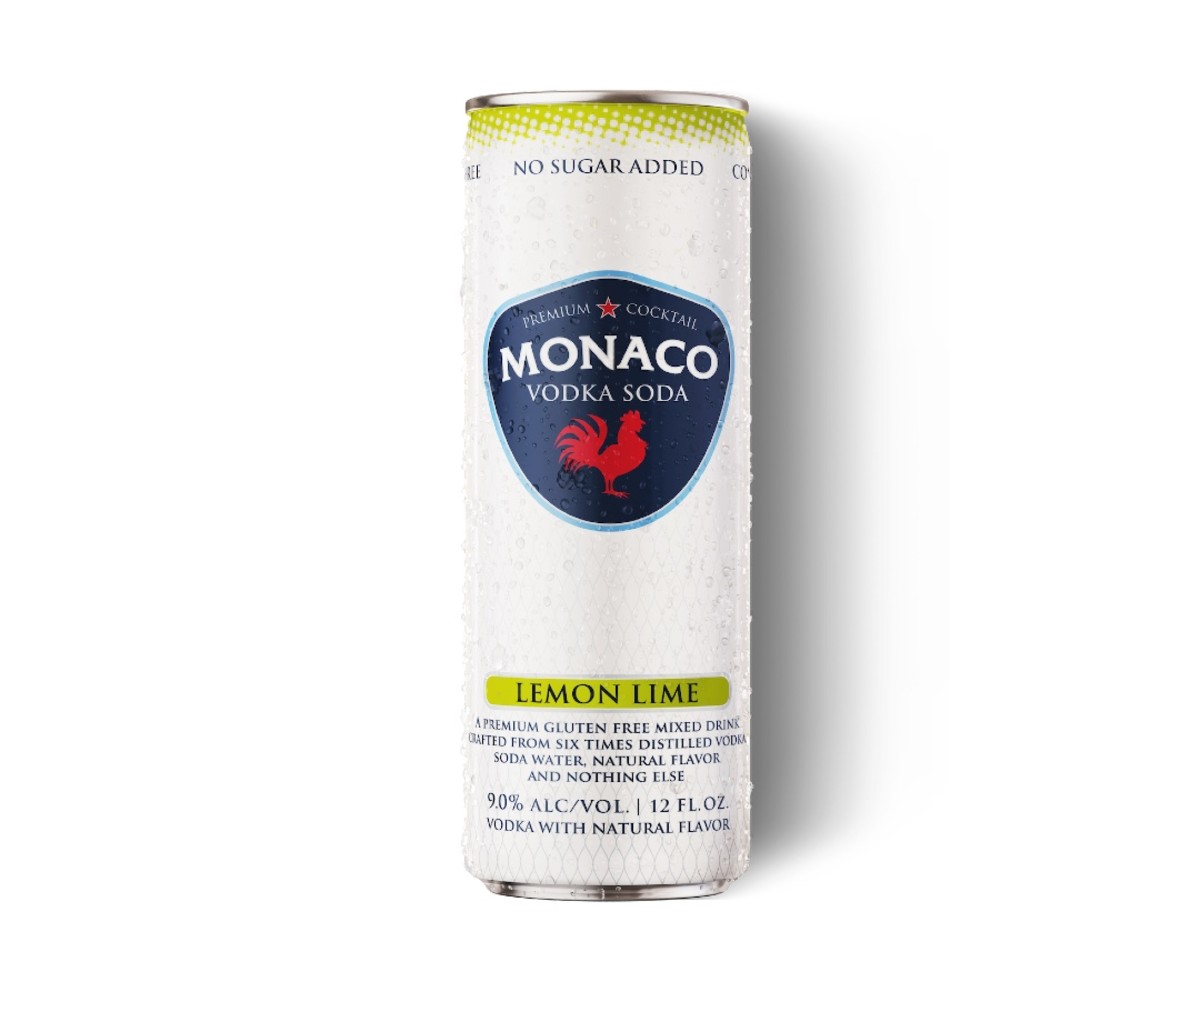 Monaco's Vodka Sodas are some of the summer's best canned cocktails.